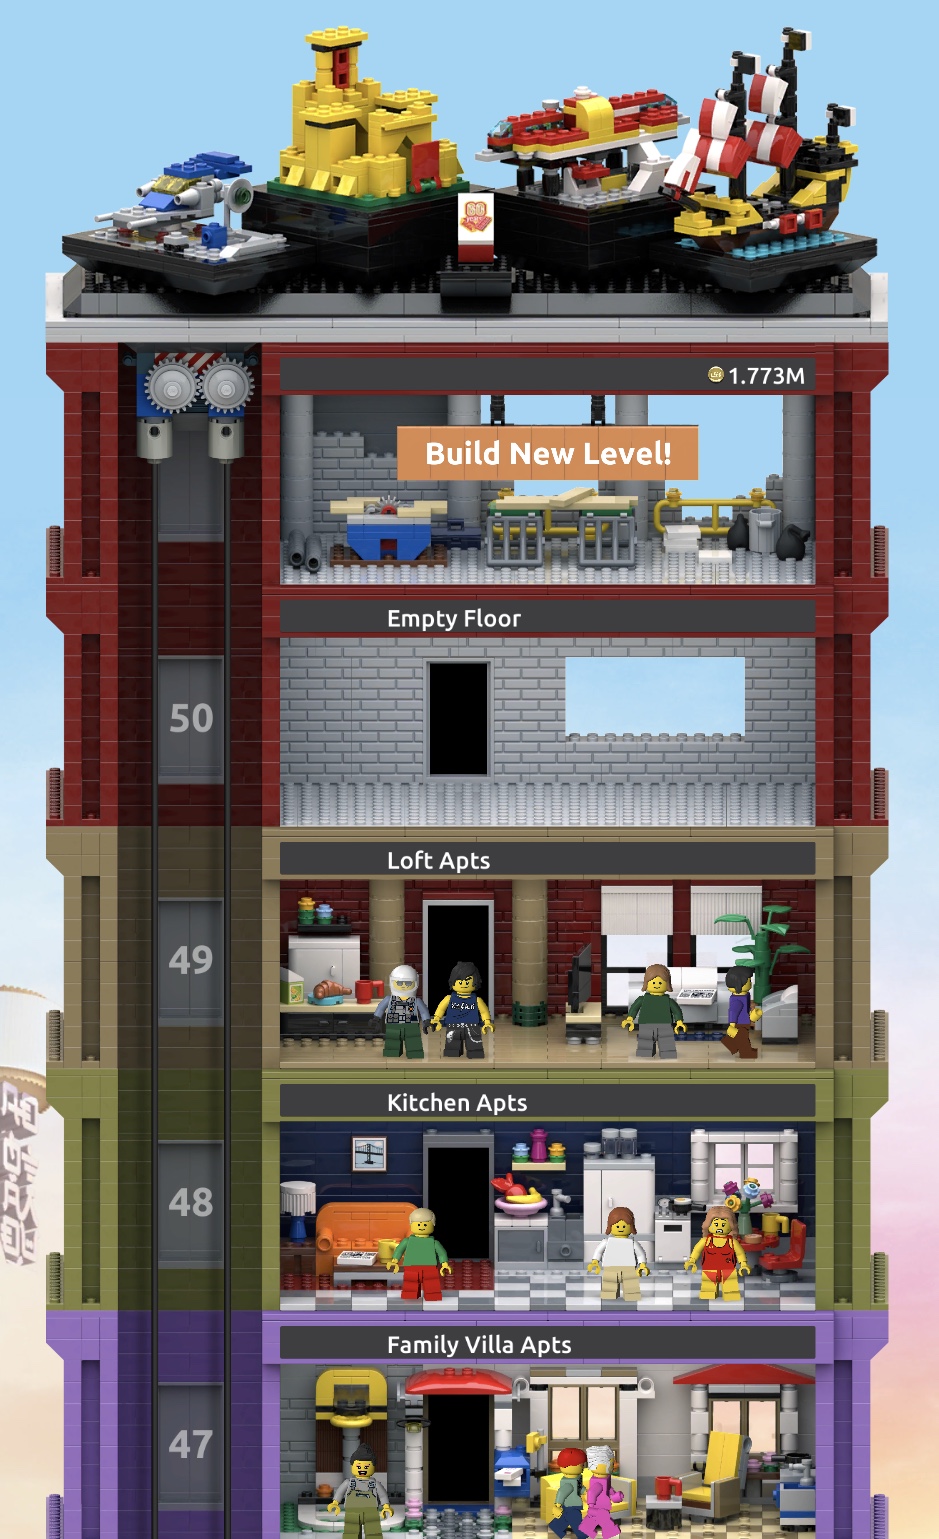 lego tower game